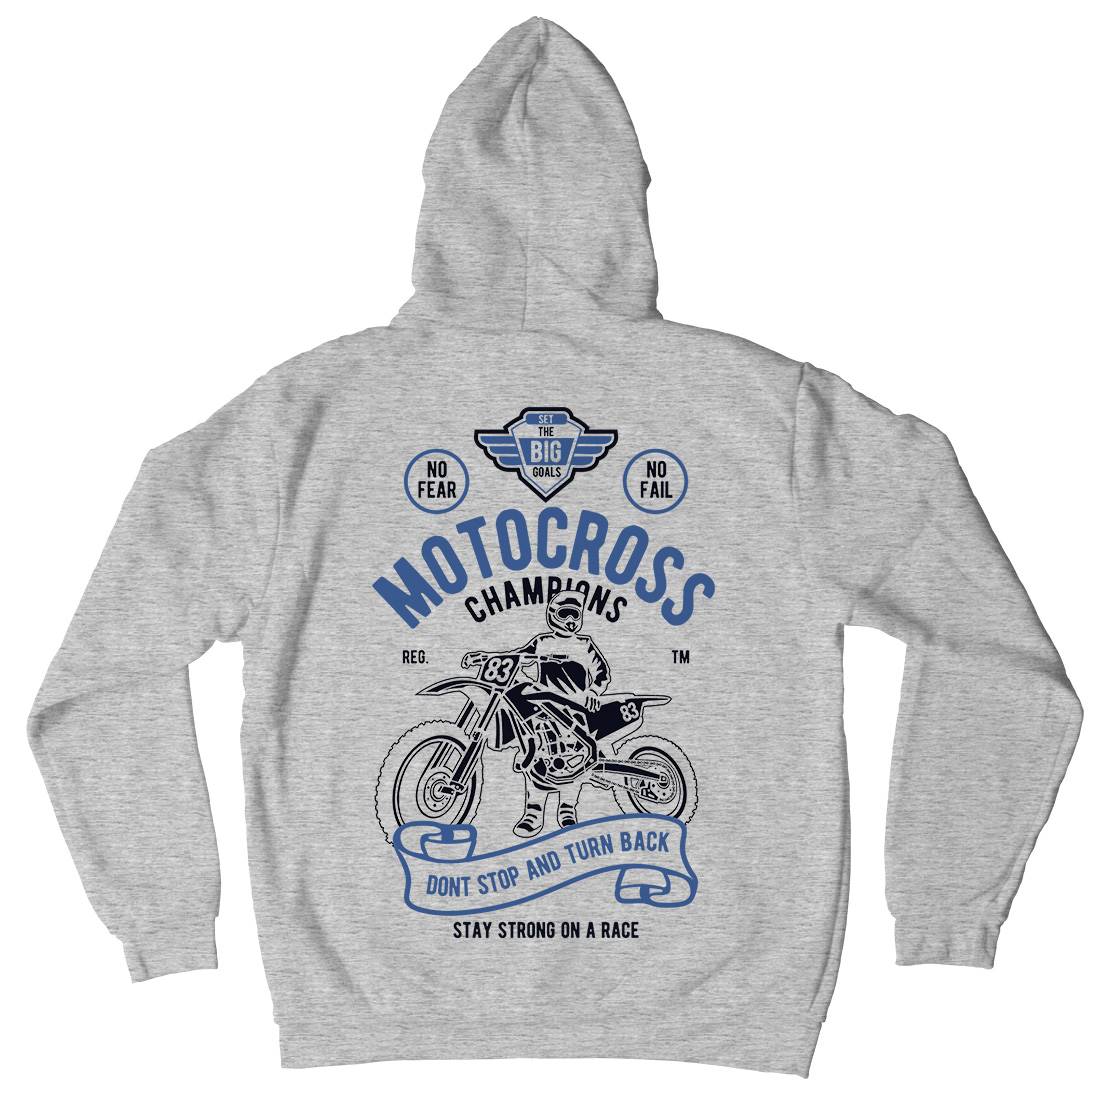 Motocross Champions Mens Hoodie With Pocket Motorcycles B230